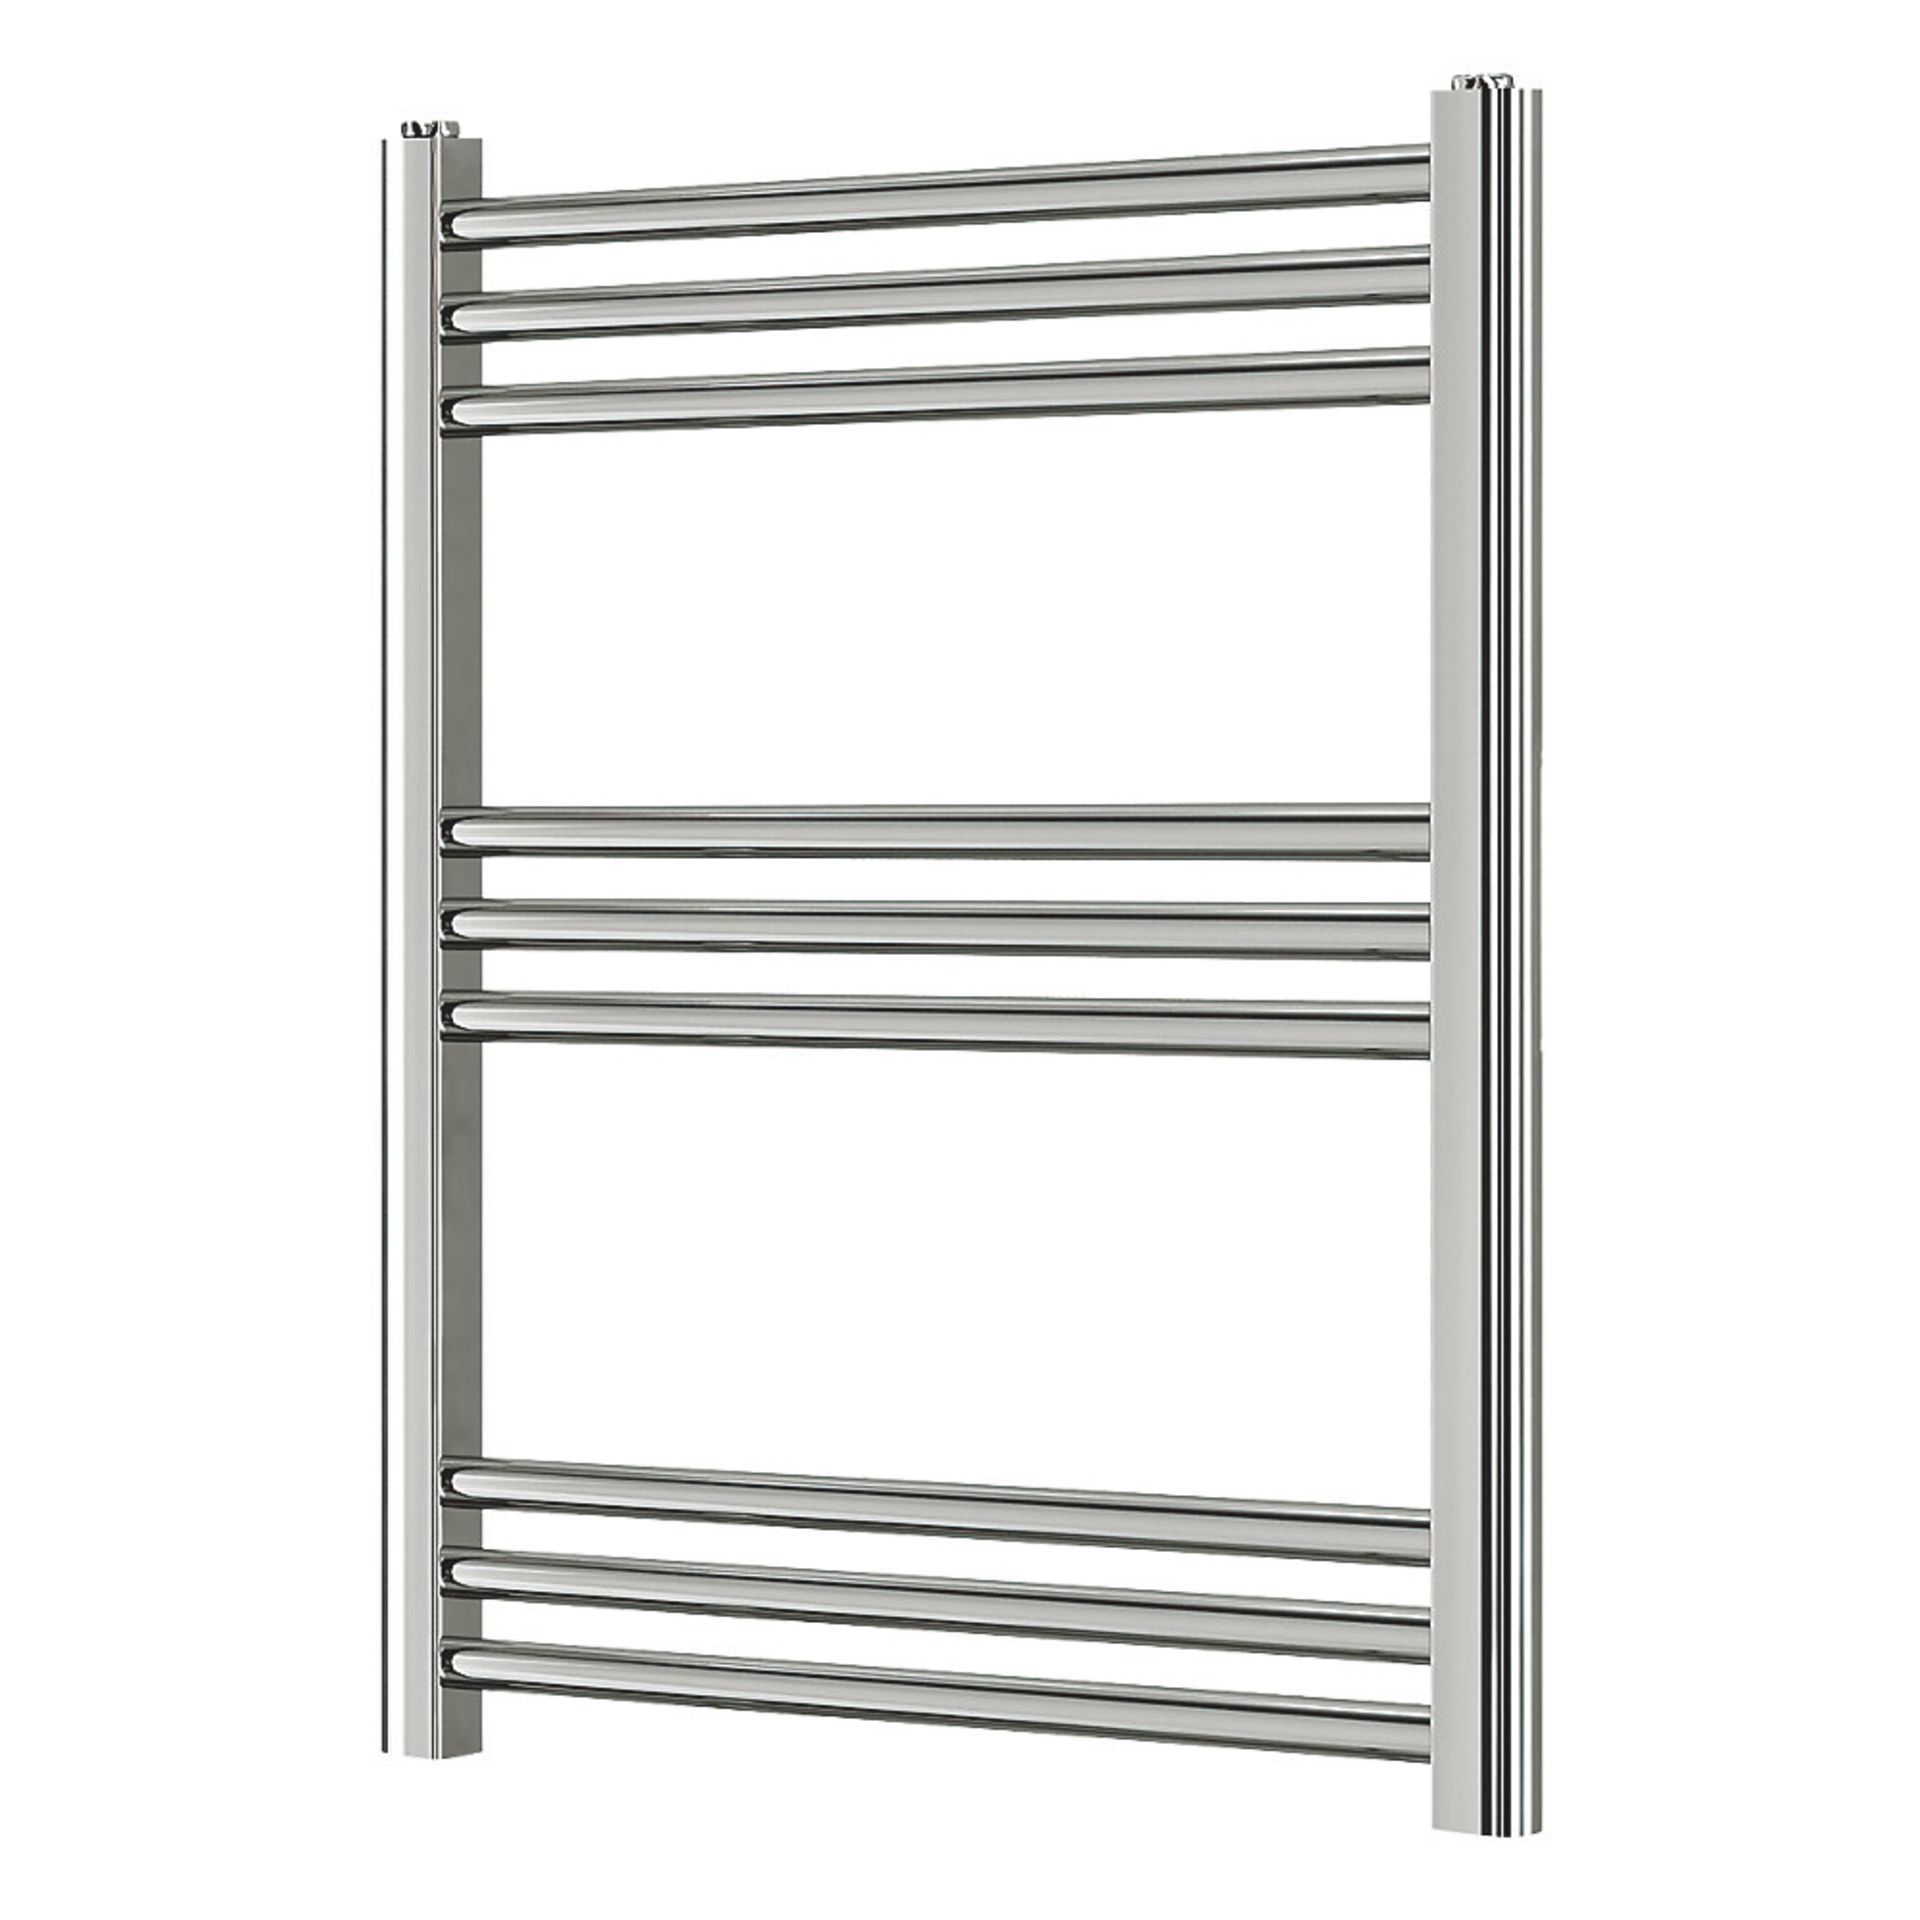 (KL102) 700 X 500mm Chrome Towel Warmer. Chrome-Plated Mild Steel Construction Suitable for Domestic - Image 2 of 2